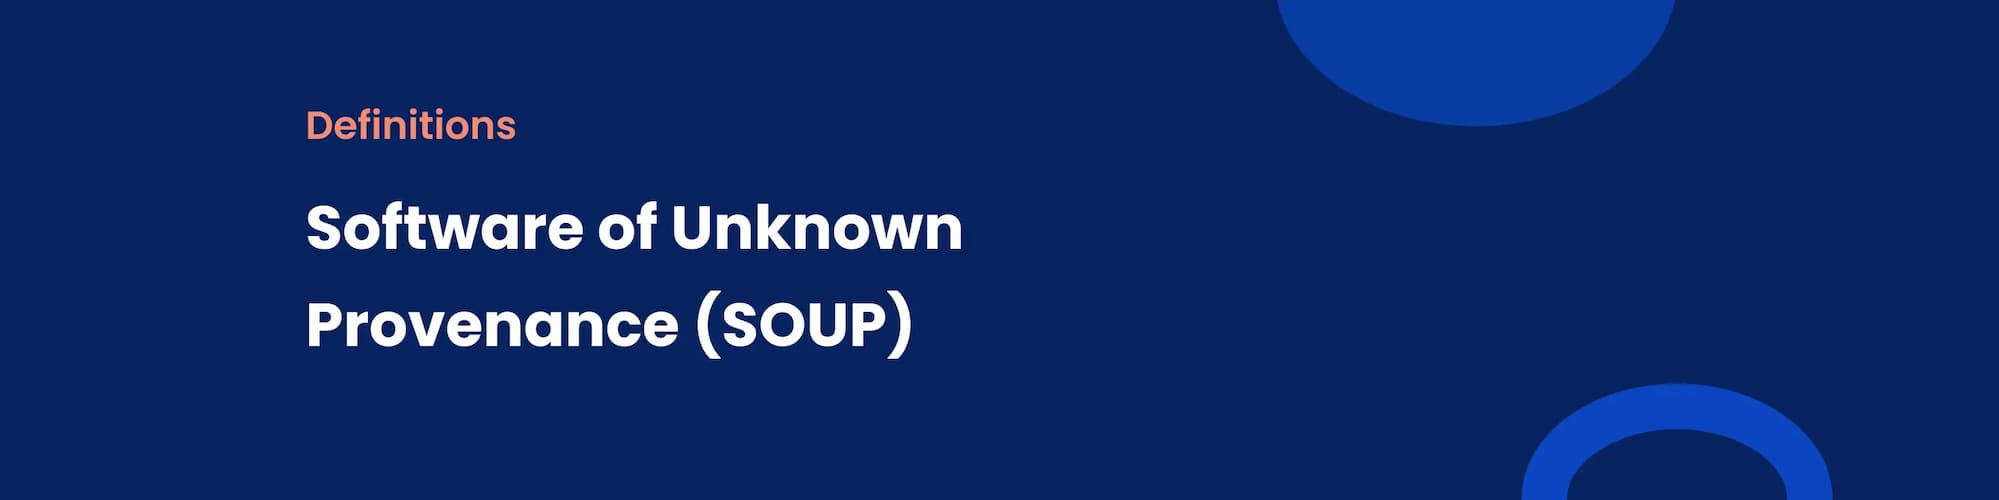 SOUP-definition-by-Revolve-Healthcare-cover.webp